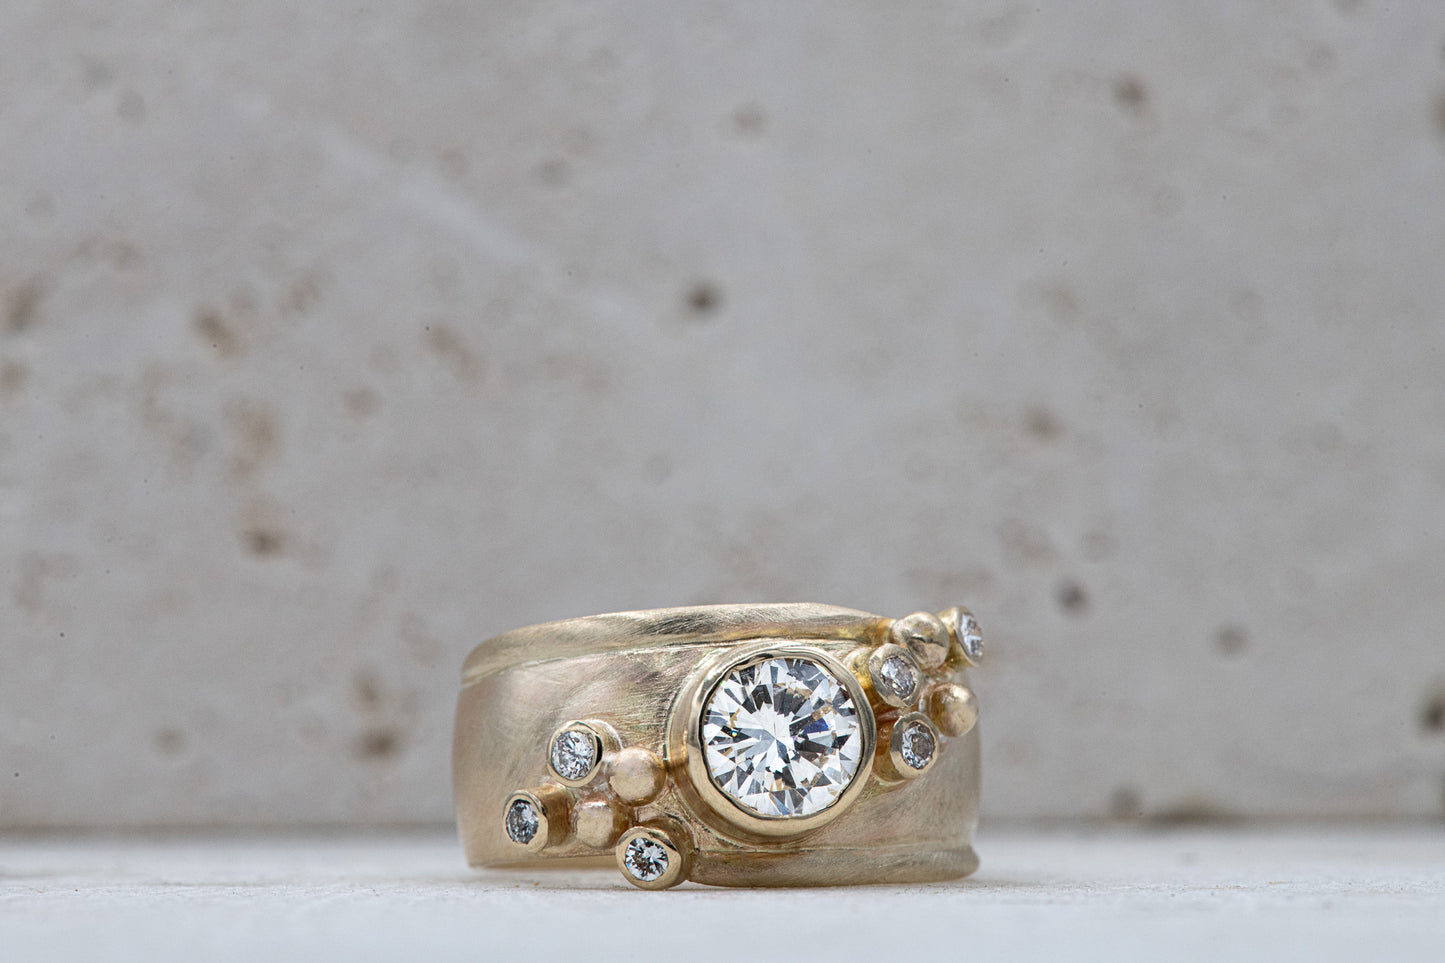 Handmade jewelry: A Wide Forever One Moissanite Gold Ring with a diamond in the center.